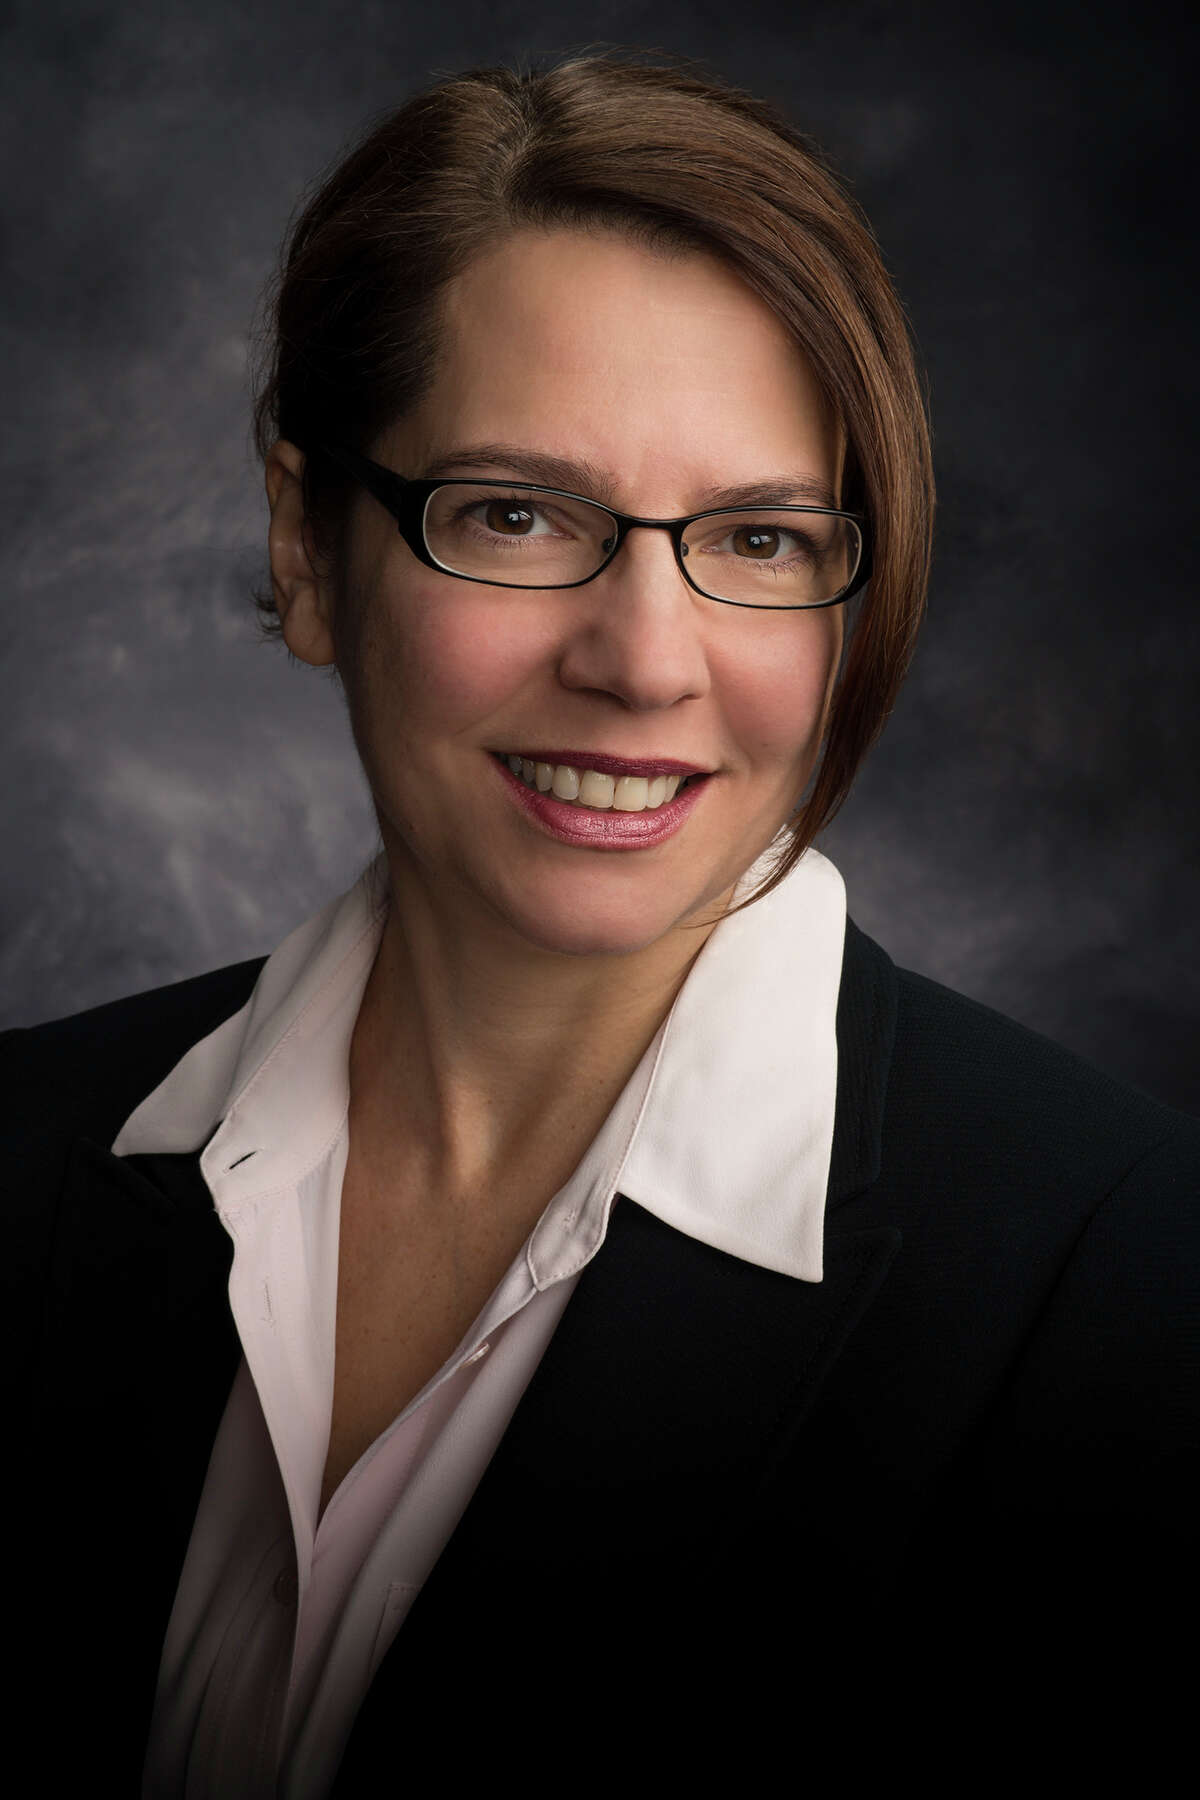 Rowena Rosenblum-Bergmans, the Vice President of Population Health for the Western Connecticut Health Network, is leading the organizationâÄôs accountable care organization that aims to improve quality and reduced costs using a collaborative approach to health care.